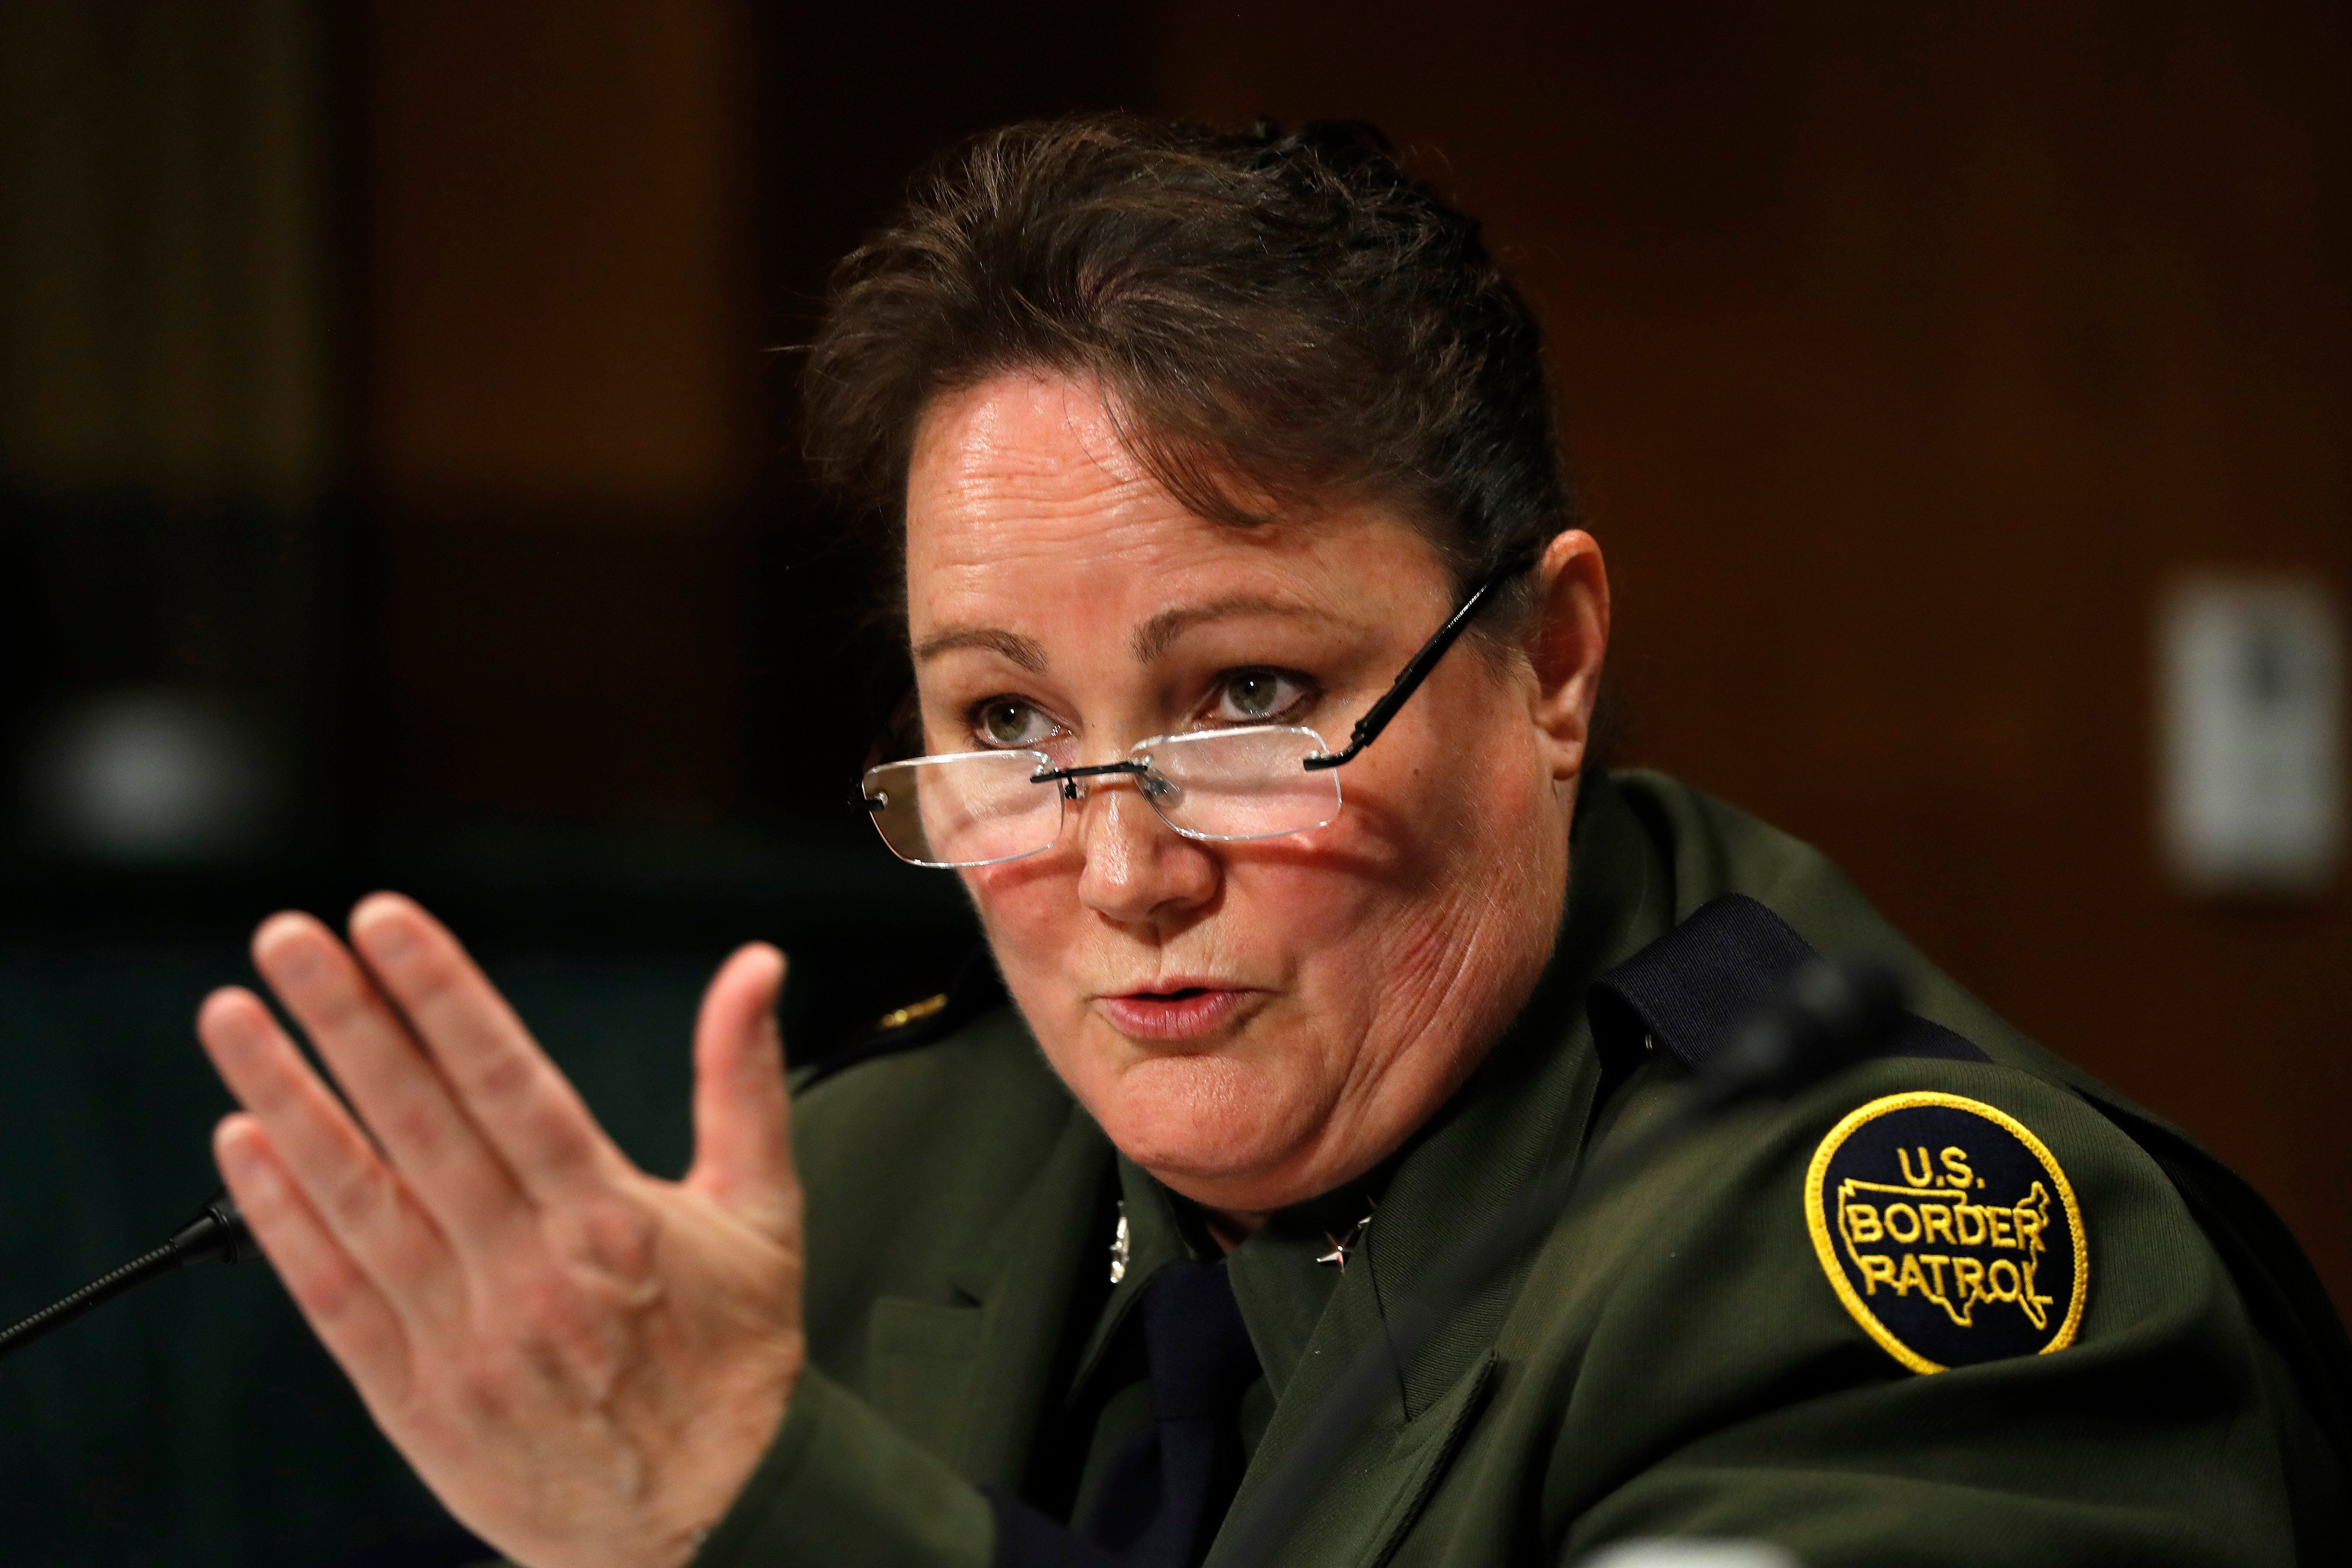 U.S. Border Patrol Chief Carla Provost testifies during a Senate Judiciary Border Security and Immigration Subcommittee hearing about the border, May 8, 2019, on Capitol Hill in Washington. 